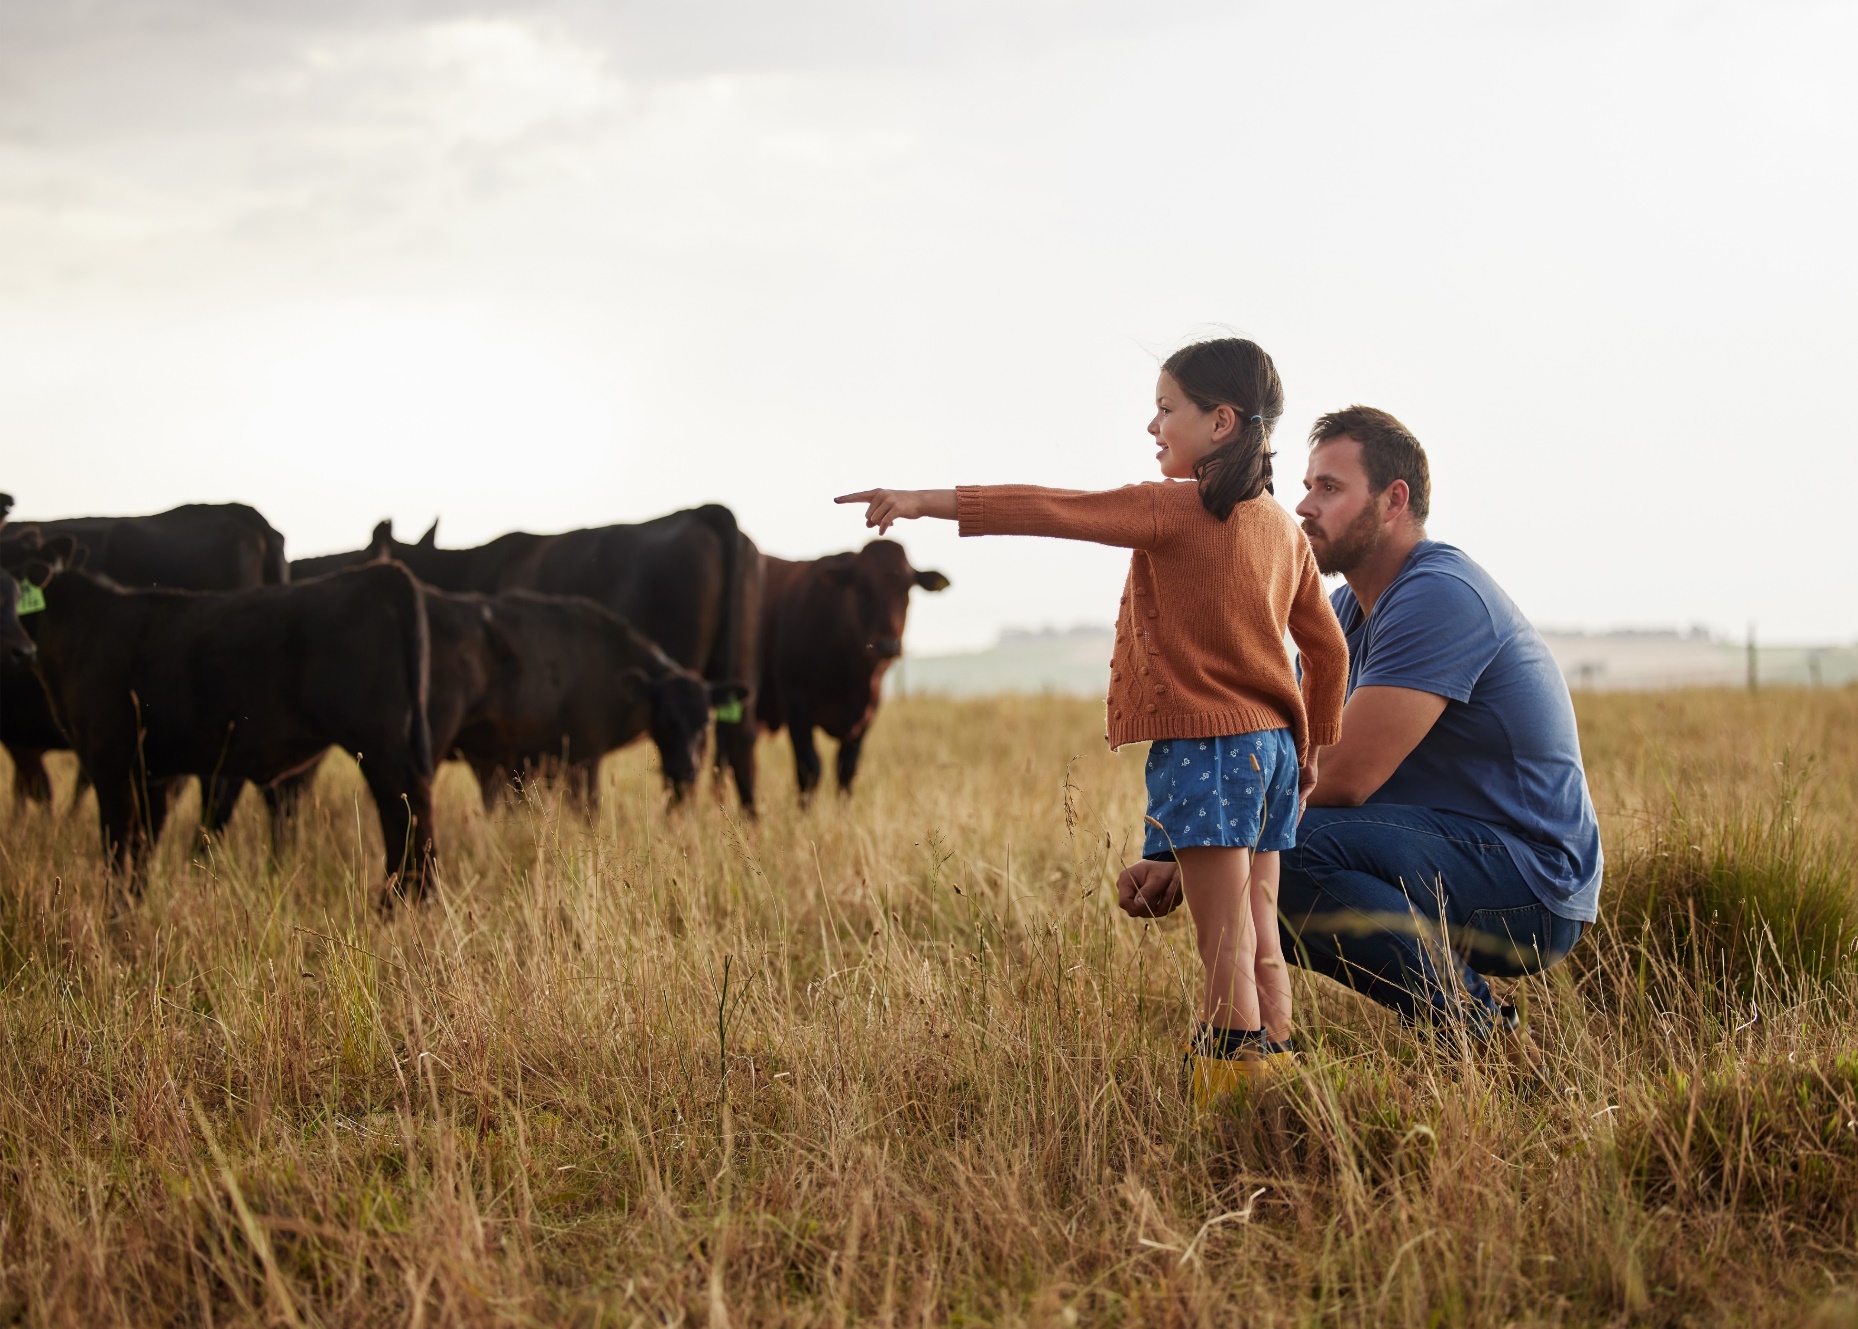 A father and daughter with cattle